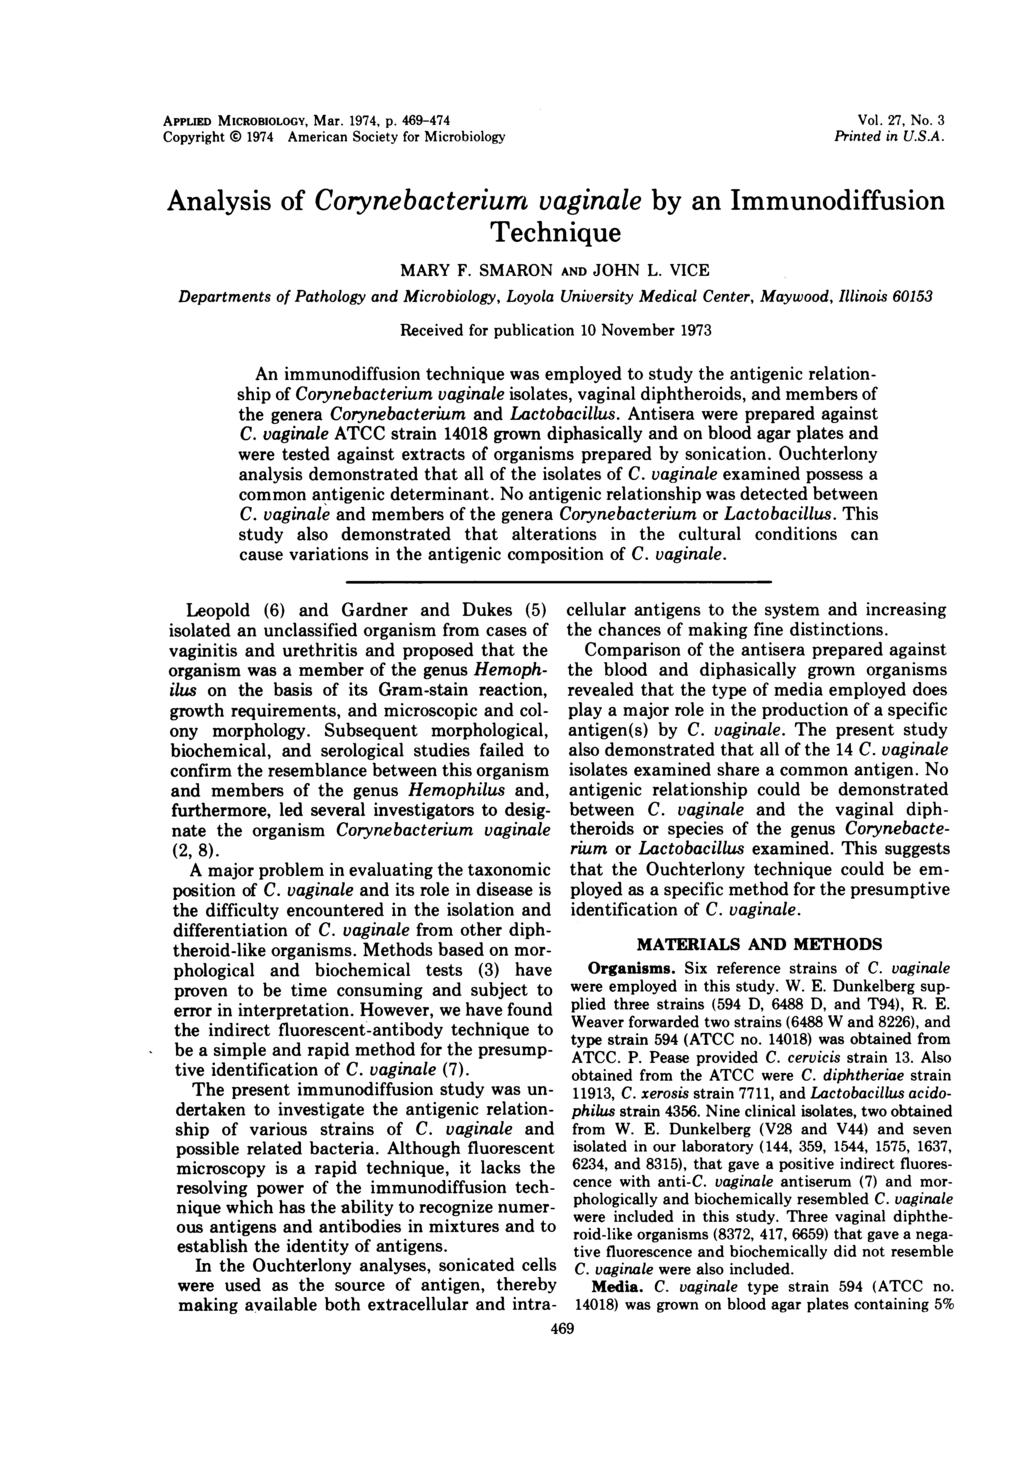 APPLIED MICROBIOLOGY, Mar. 1974, p. 469-474 Copyright 0 1974 American Society for Microbiology Vol. 27, No. 3 Printed in U.S.A. Analysis of Corynebacterium vaginale by an Immunodiffusion Technique MARY F.